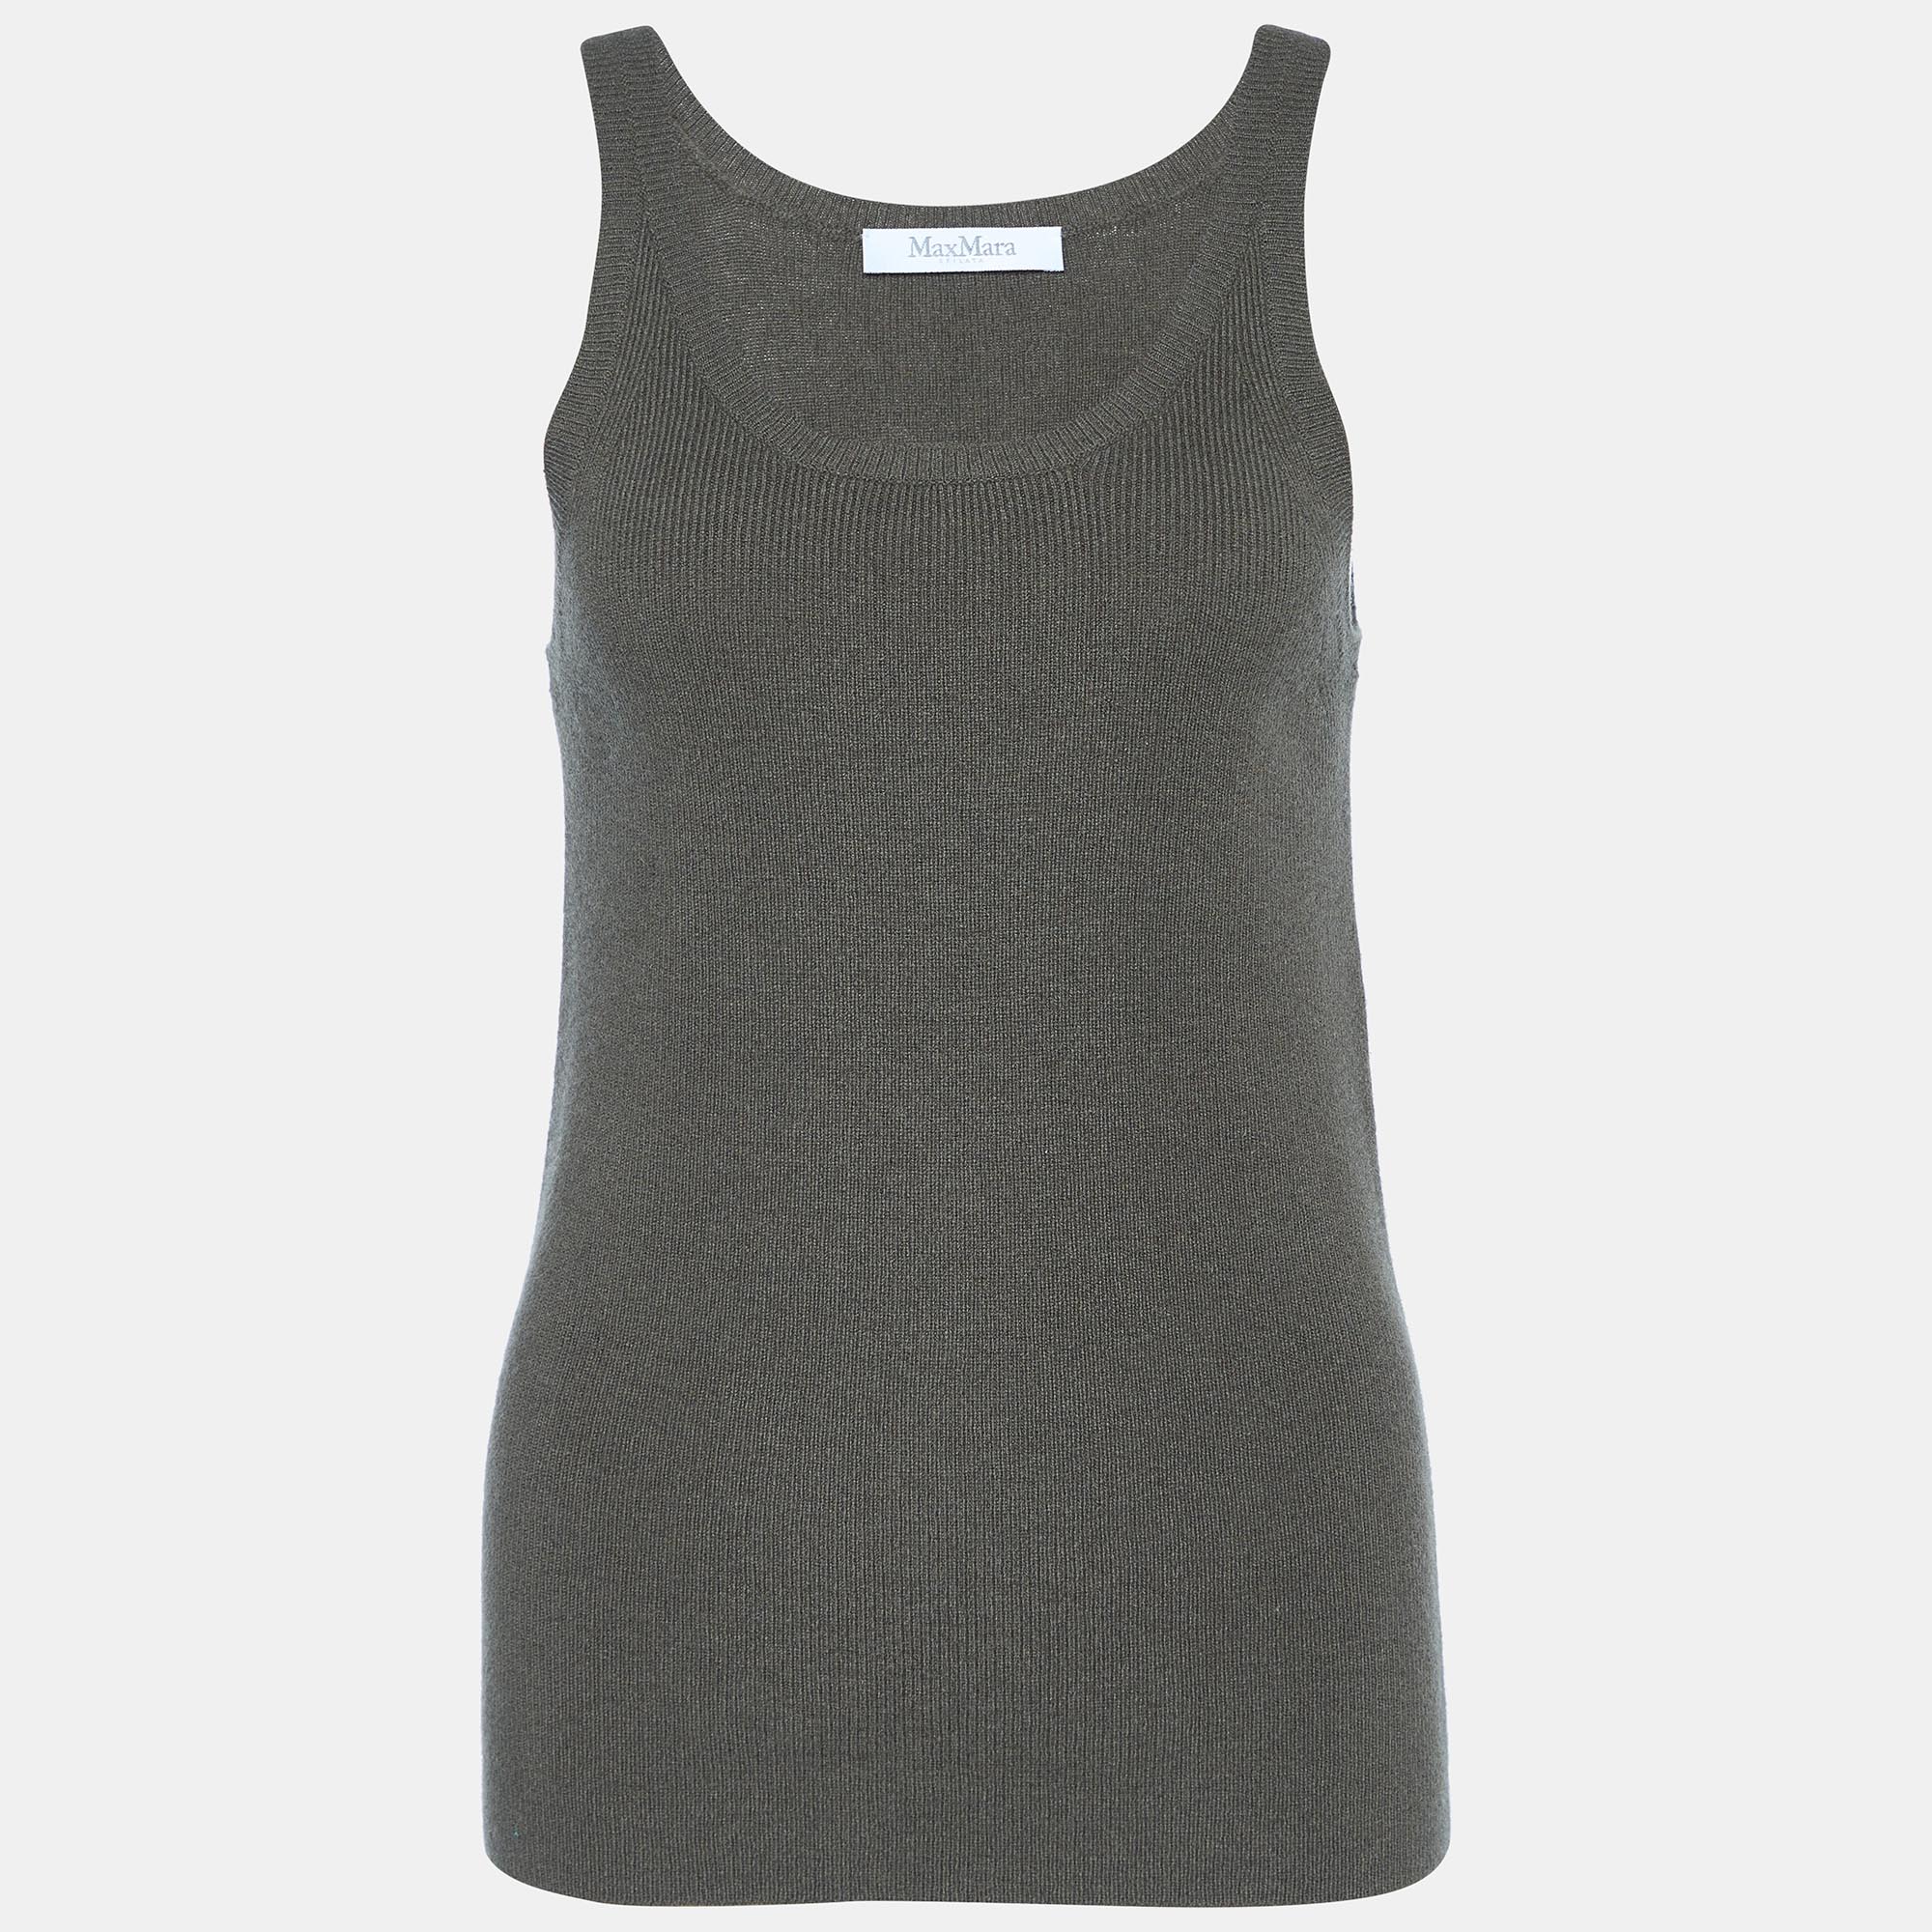 Pre-owned Max Mara Military Green Wool Cashmere Tank Top M